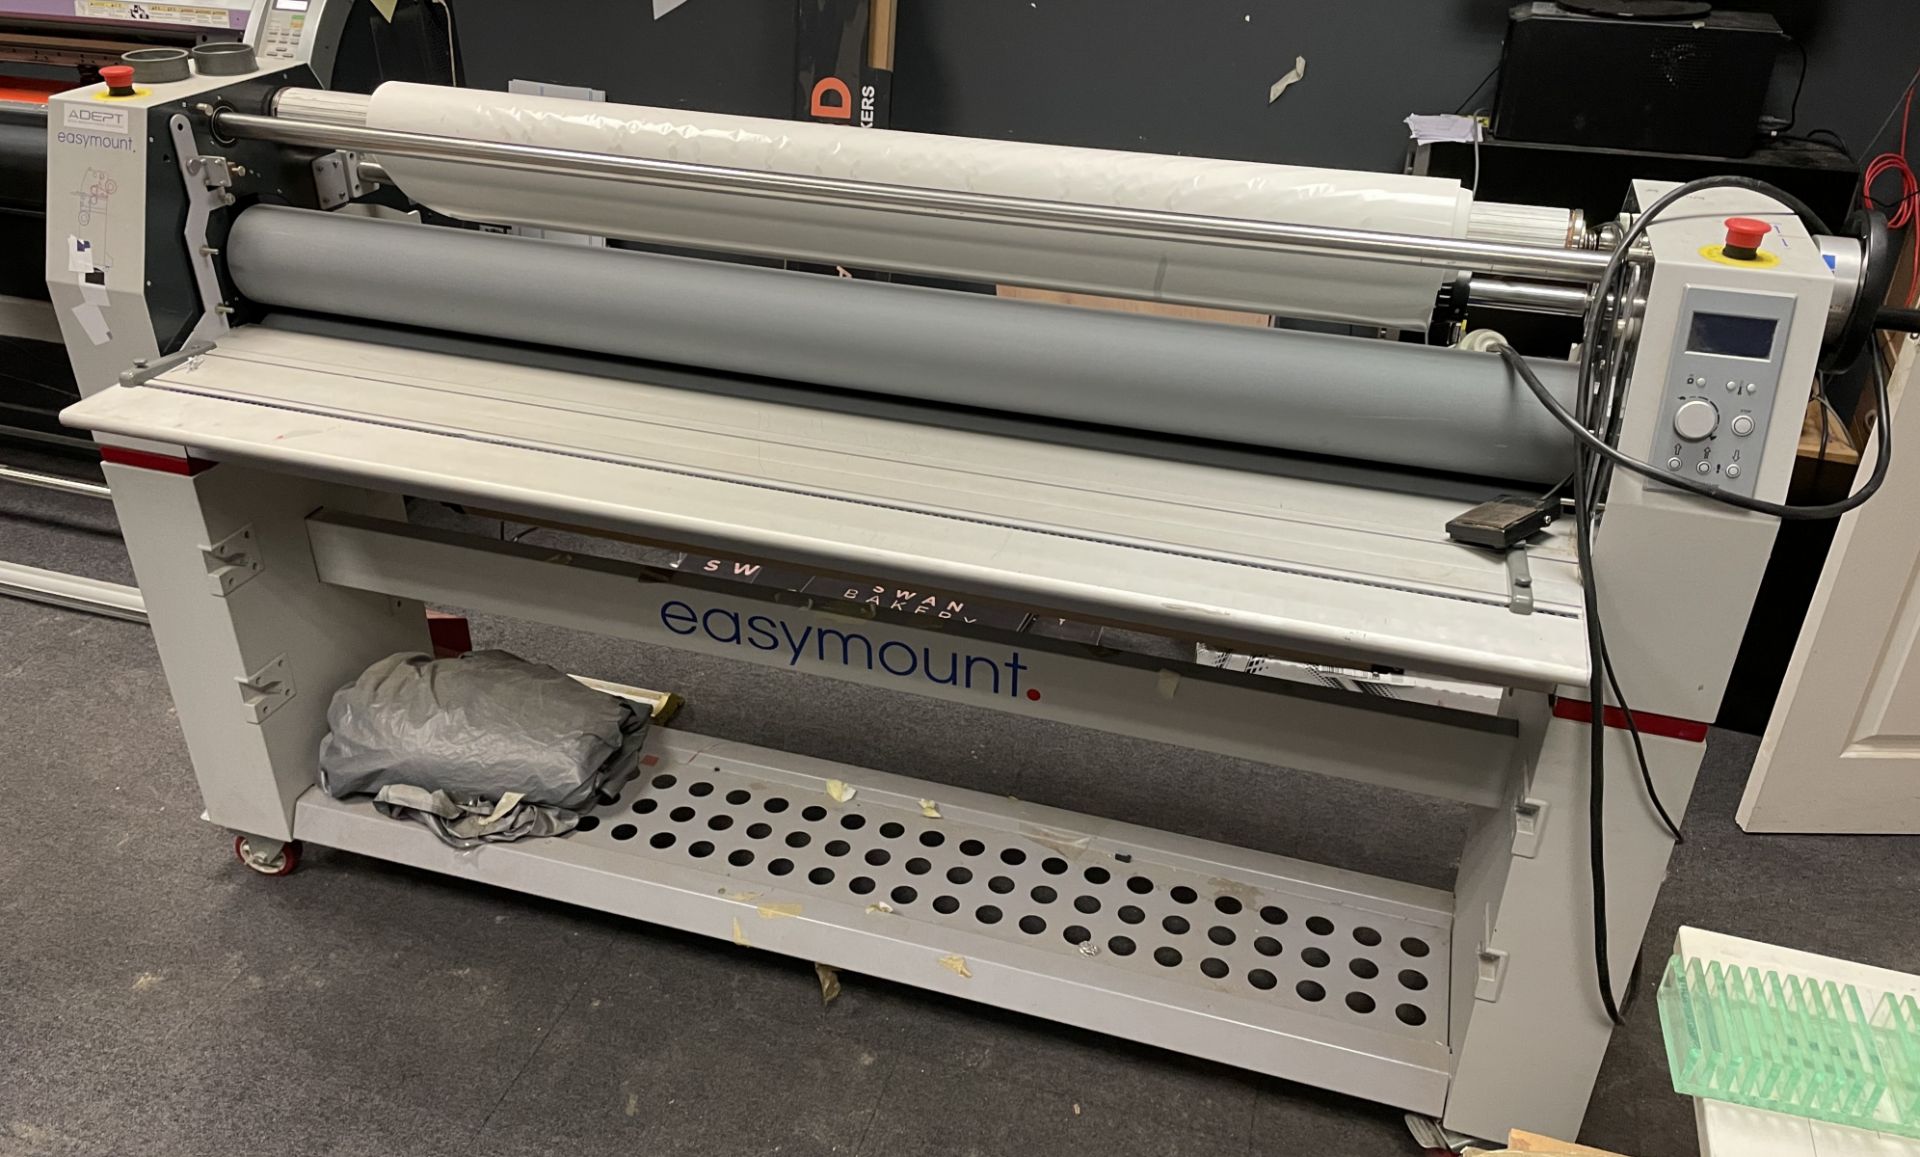 Easymount EM-1600SHW Wide Format Laminator (Location Oldham. Please Refer to General Notes) - Image 2 of 4